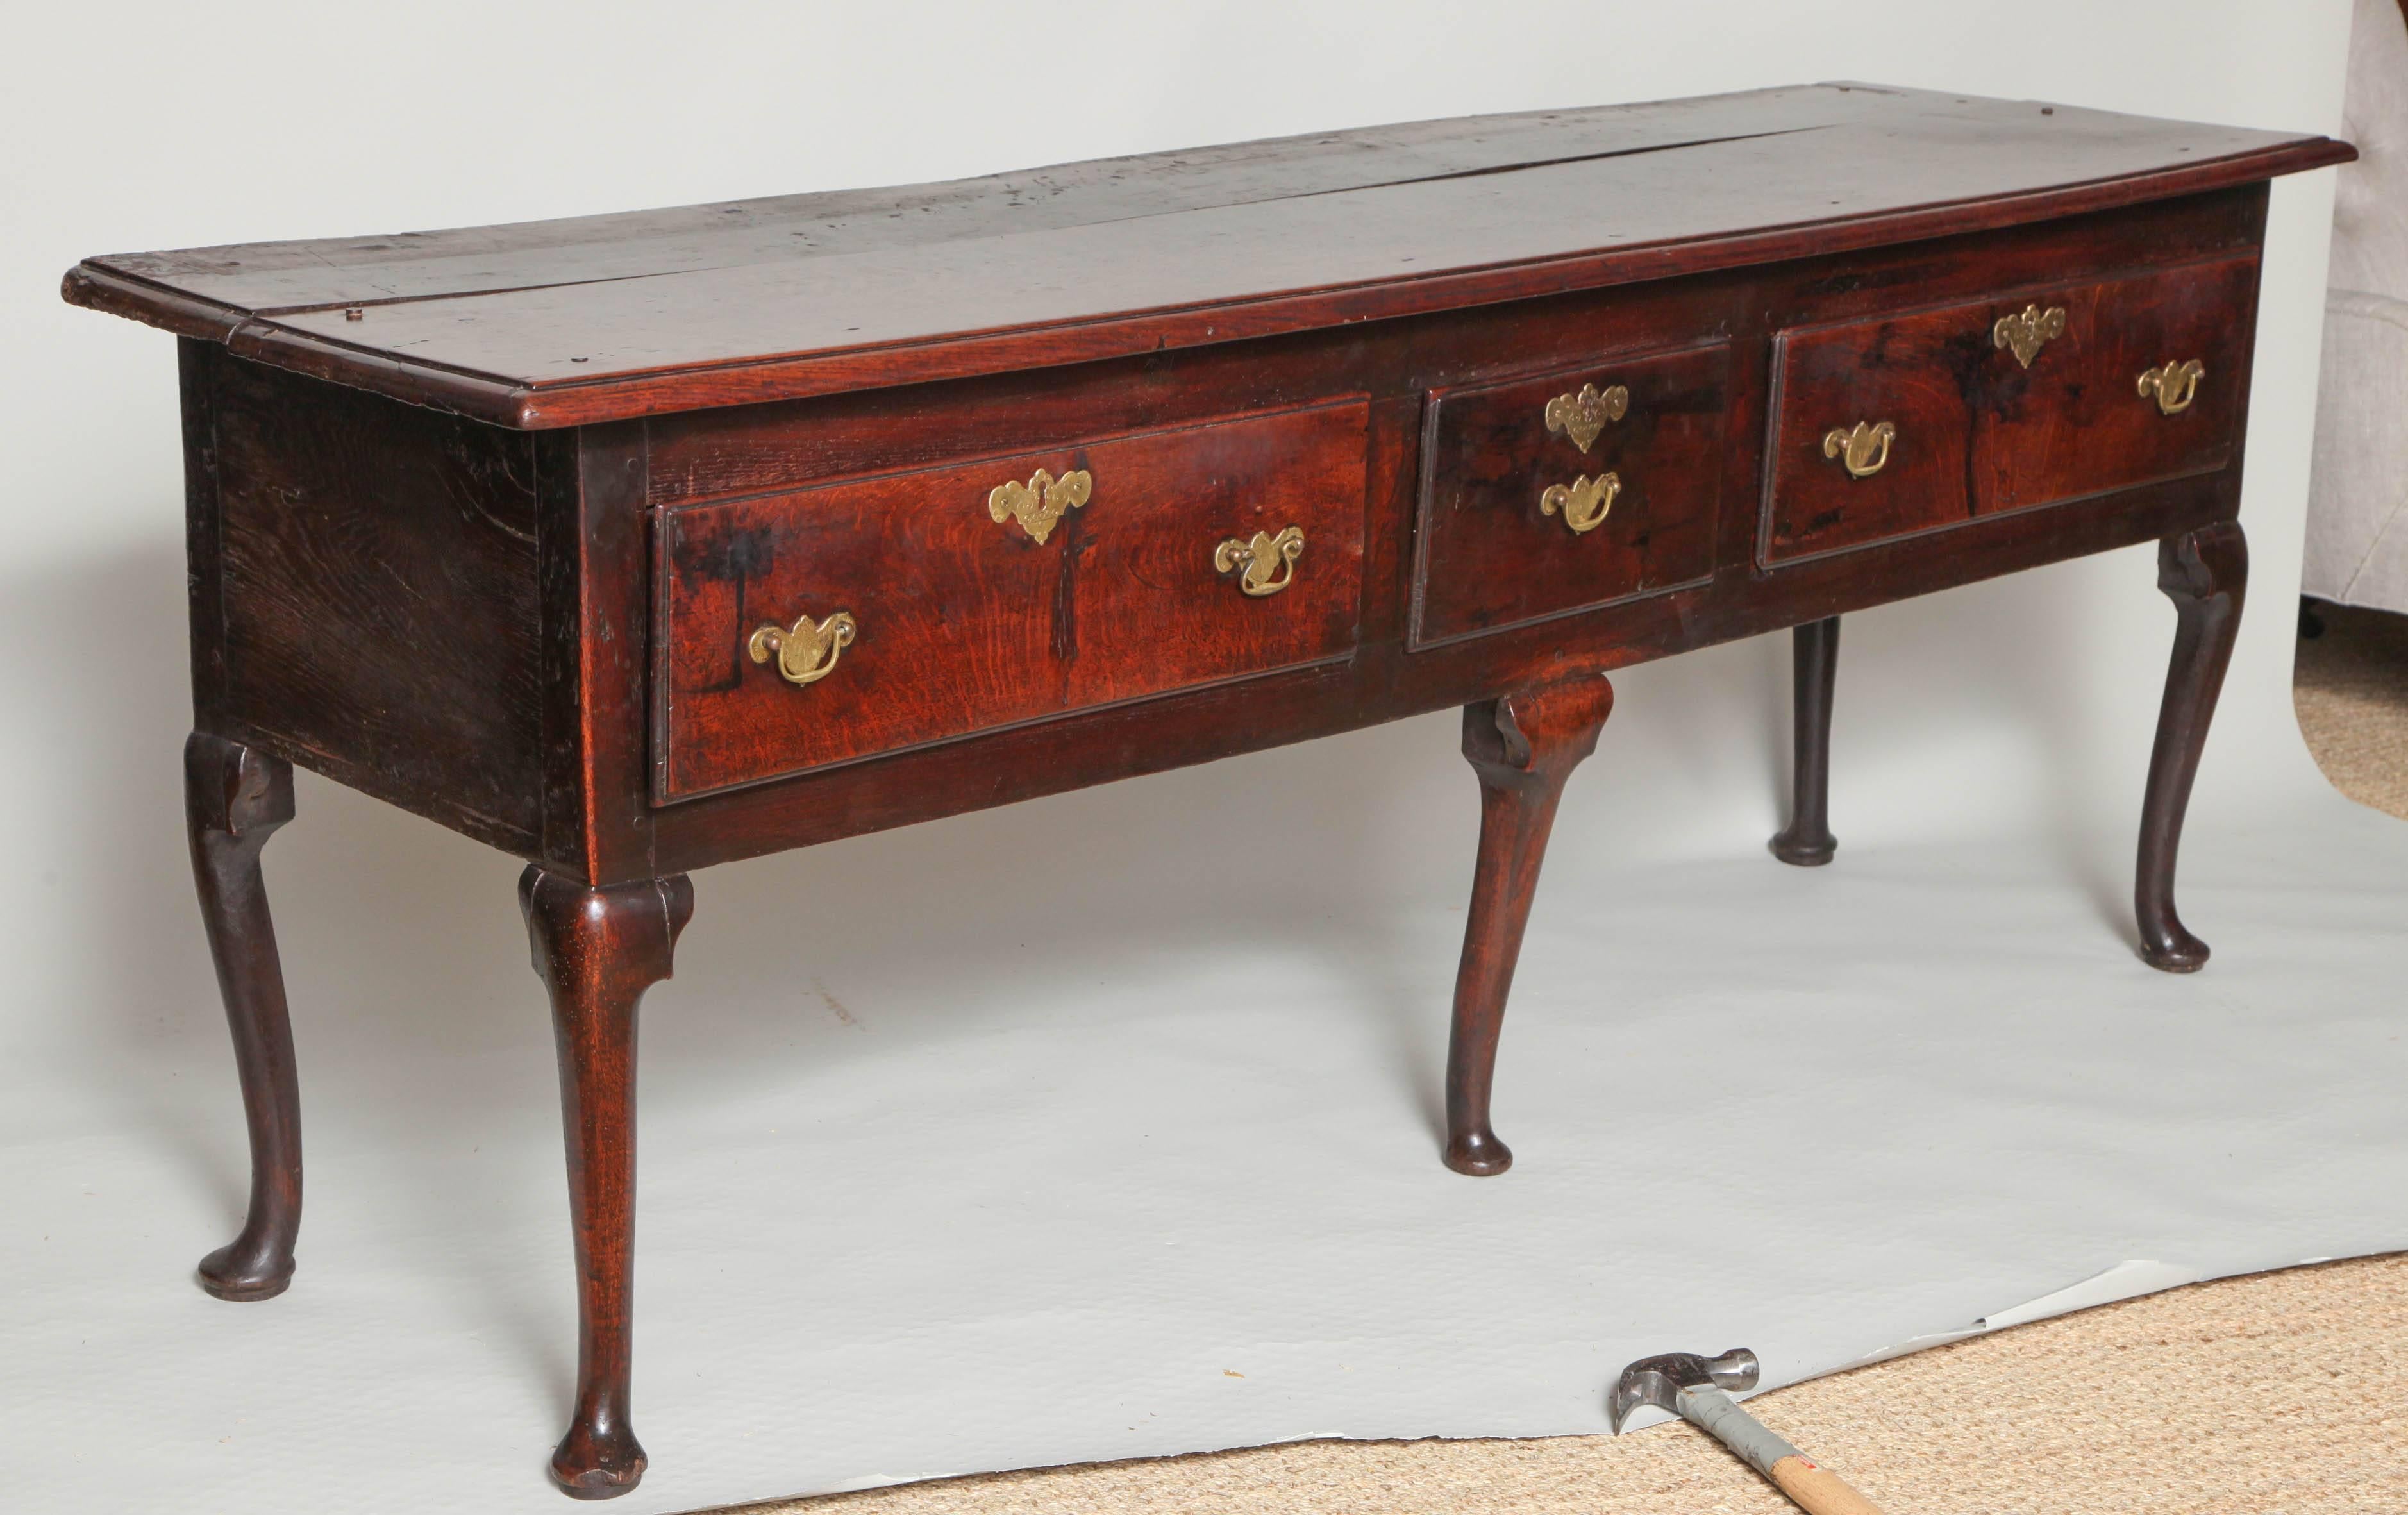 A very good mid-18th century English oak low dresser having a generously overhung top with thumb molding over three drawers and standing on well formed cabriole legs, the whole with rich, lustrous surface, West Country - possibly Somerset or Dorset,